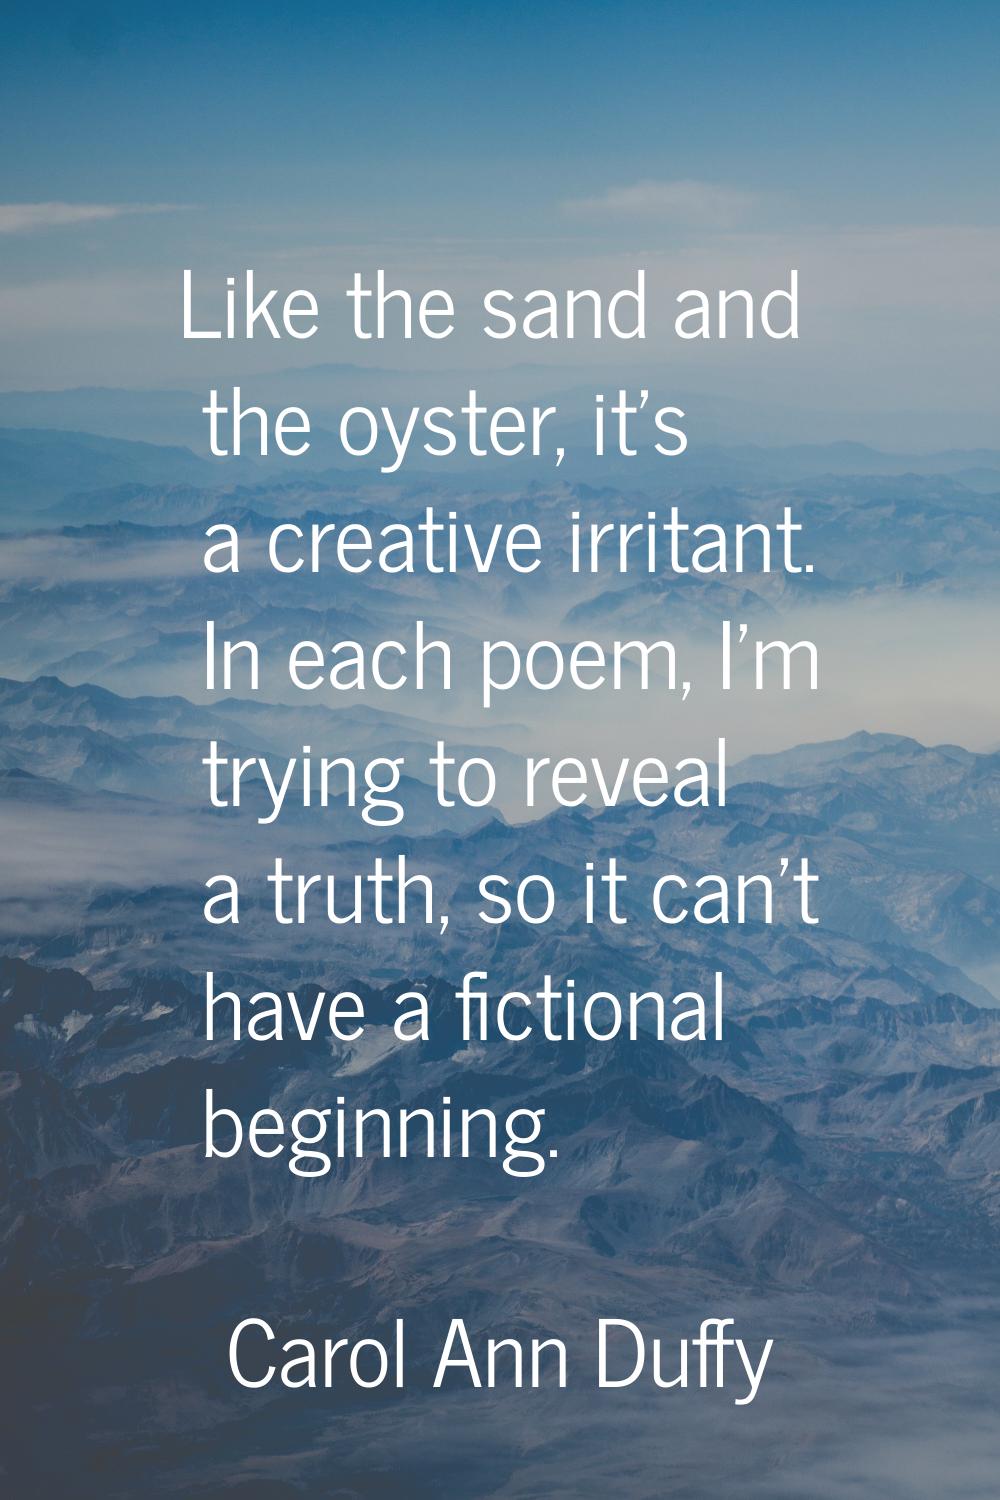 Like the sand and the oyster, it's a creative irritant. In each poem, I'm trying to reveal a truth,